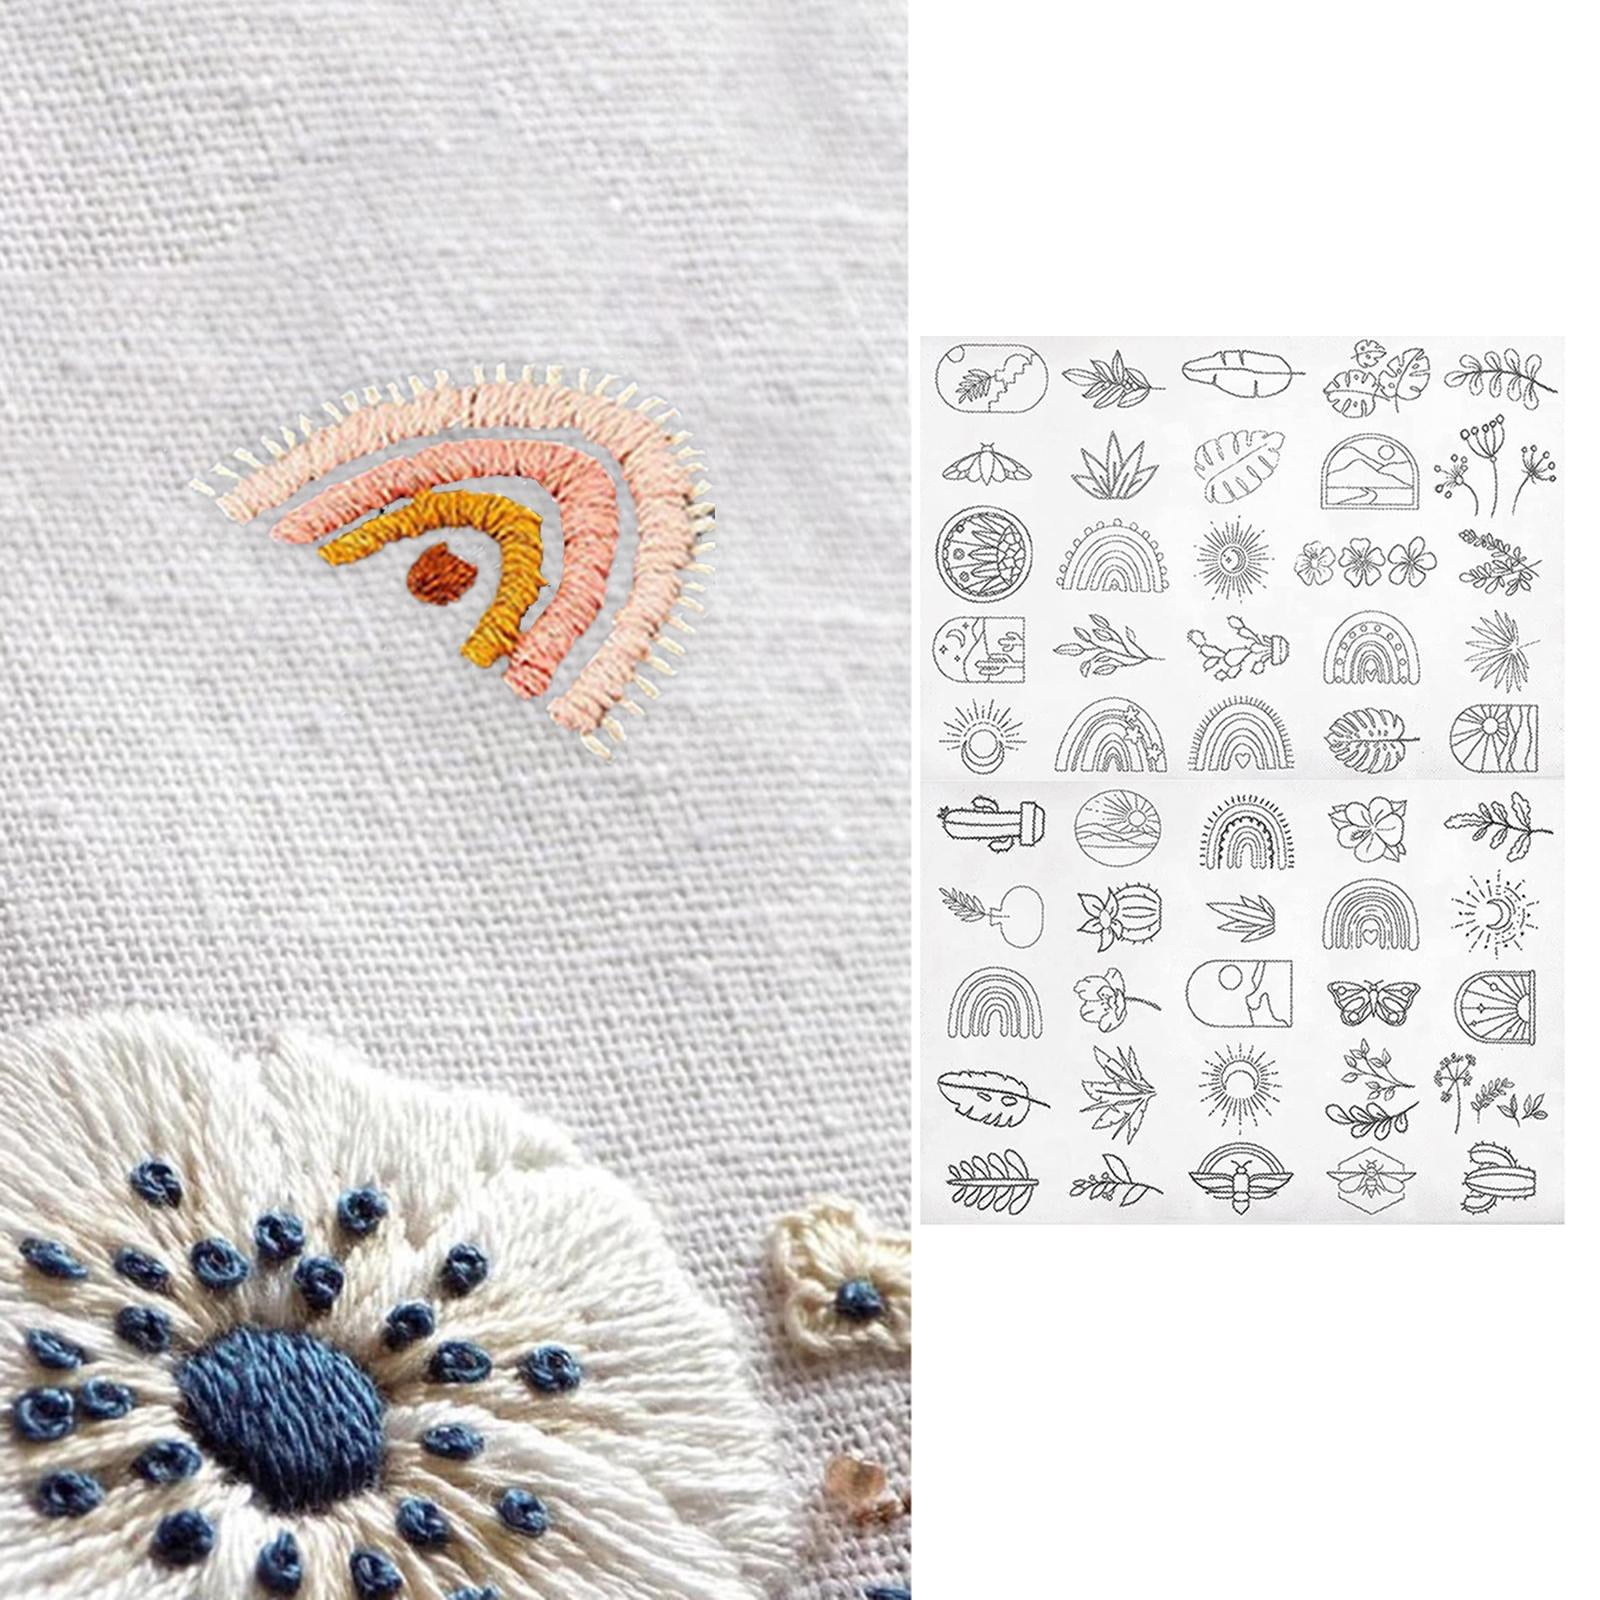 46Pcs Water Soluble Embroidery Patterns,Embroidery Stick and Stitch  Embroidery Paper Transfers Water Soluble Stabilizer for Embroidery,with